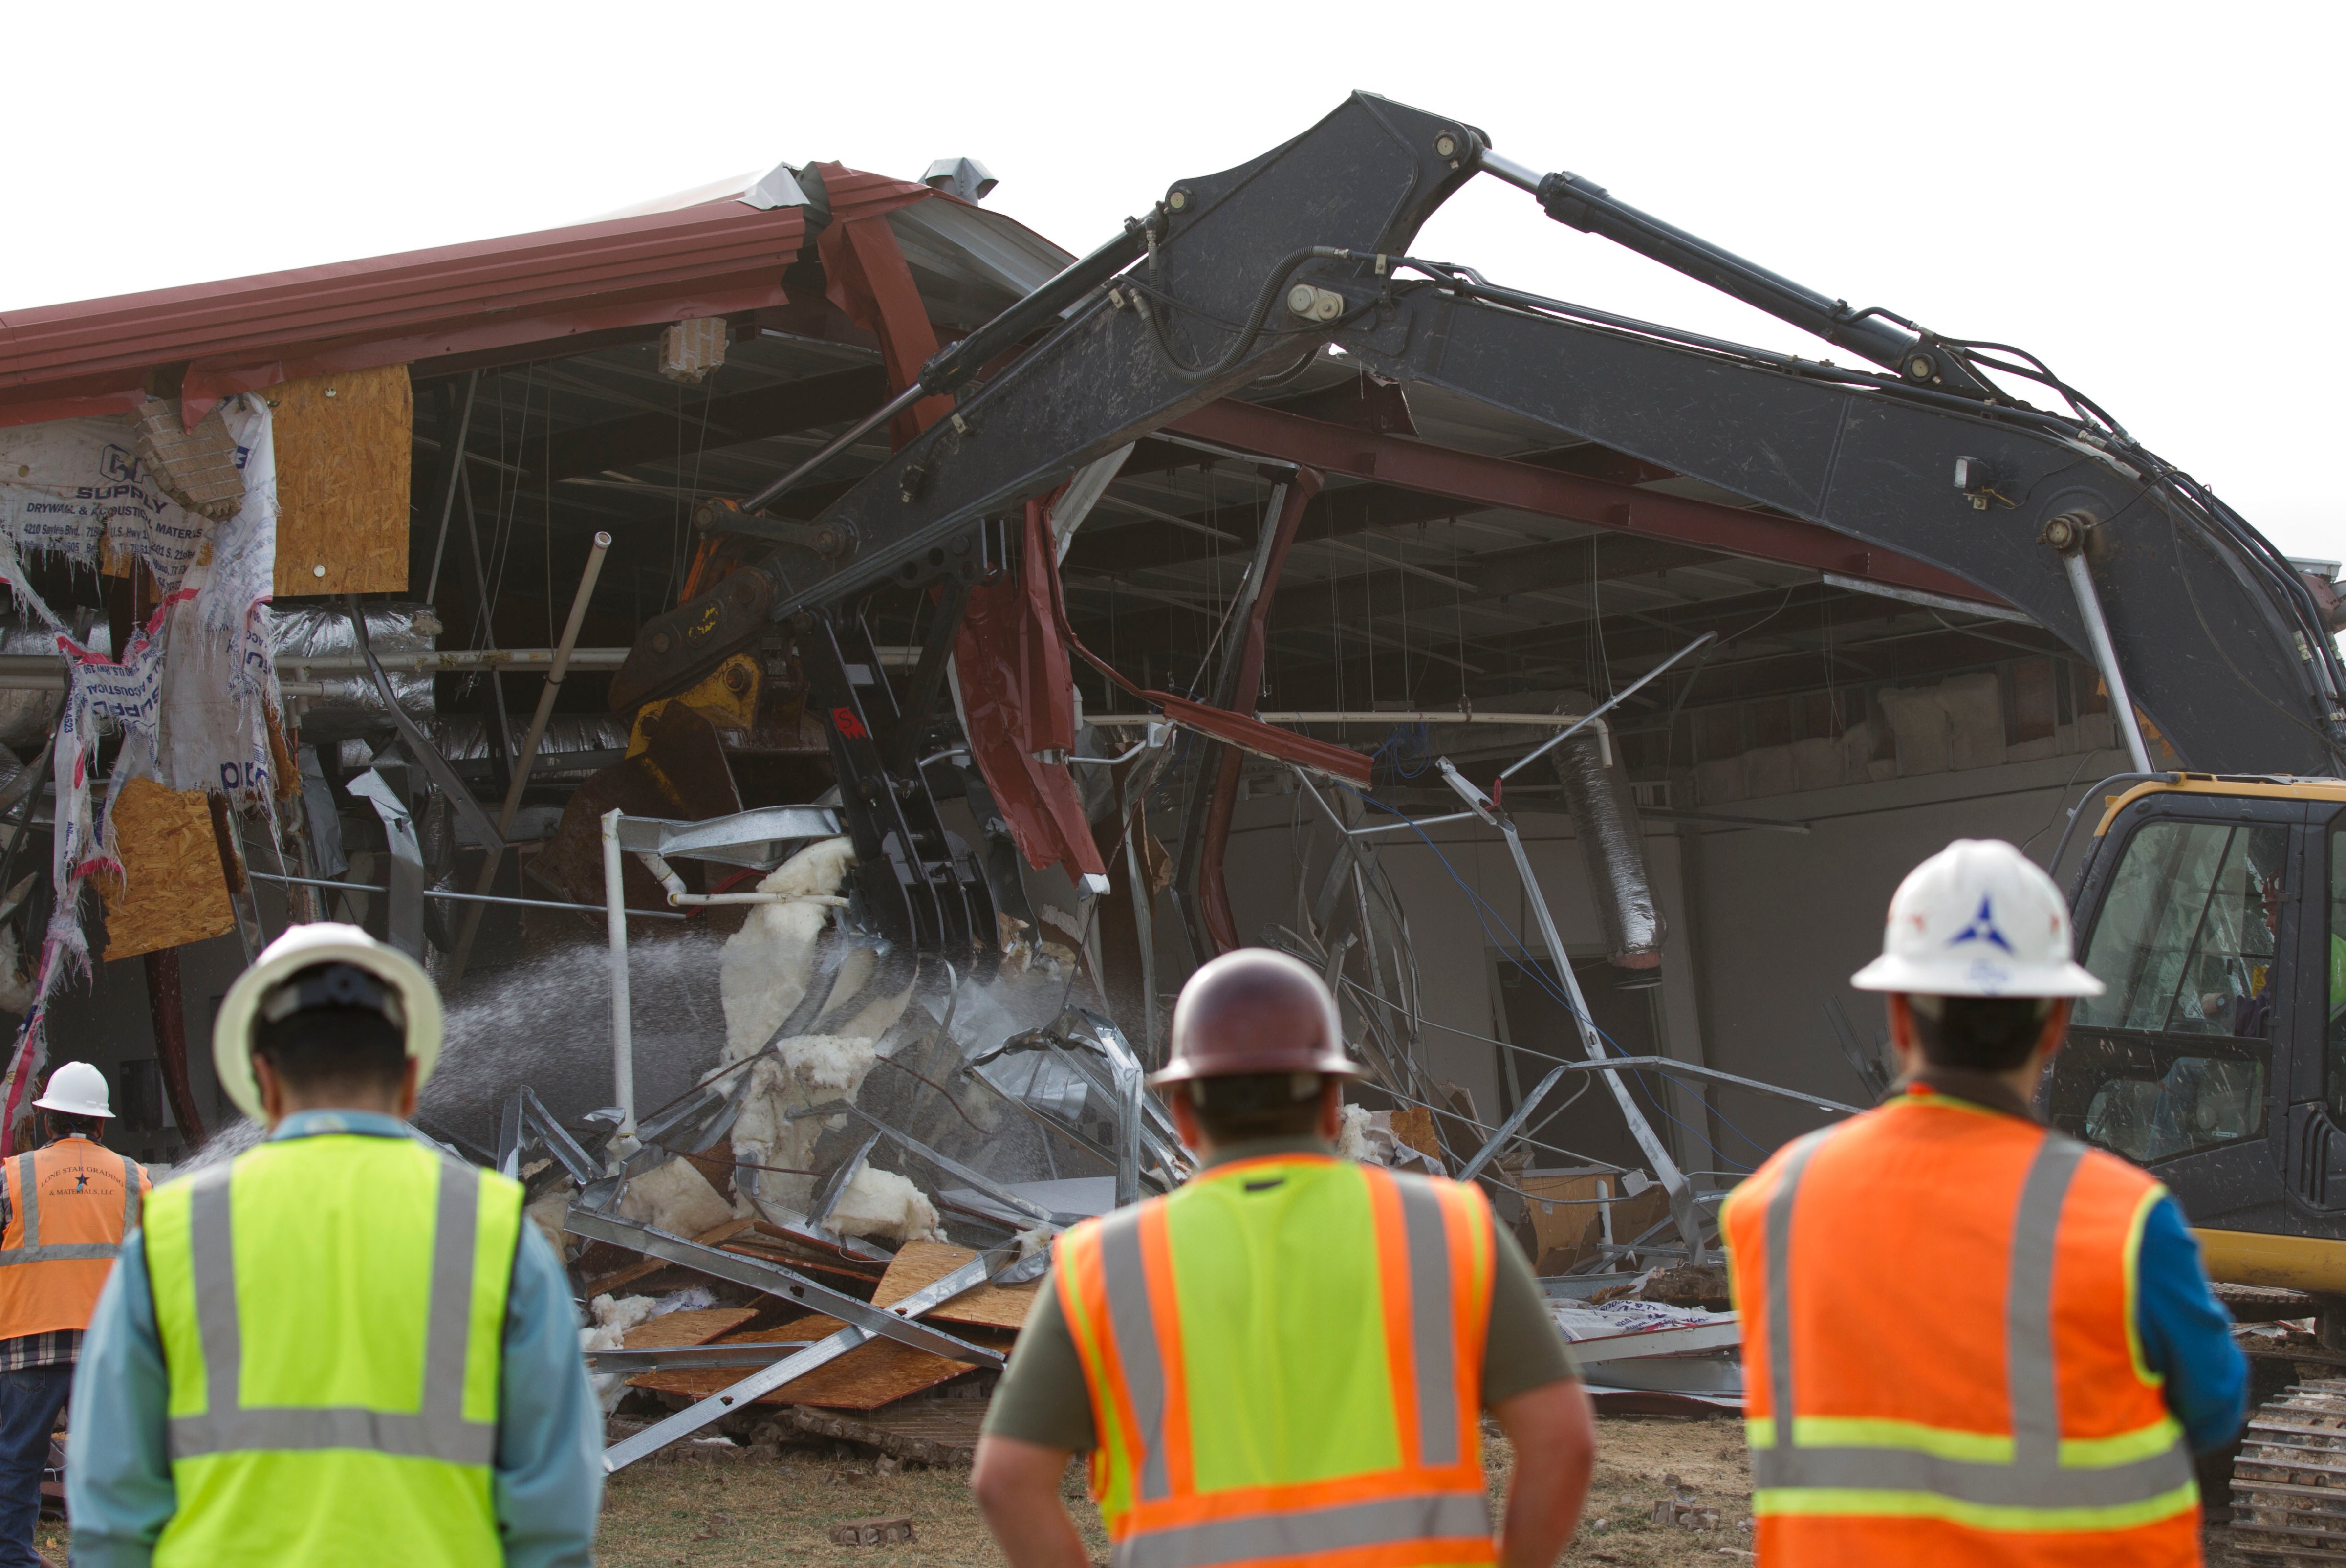 Building 42003 being demolished at Fort Hood in February. (Fort Hood Public Affairs Office / AP)